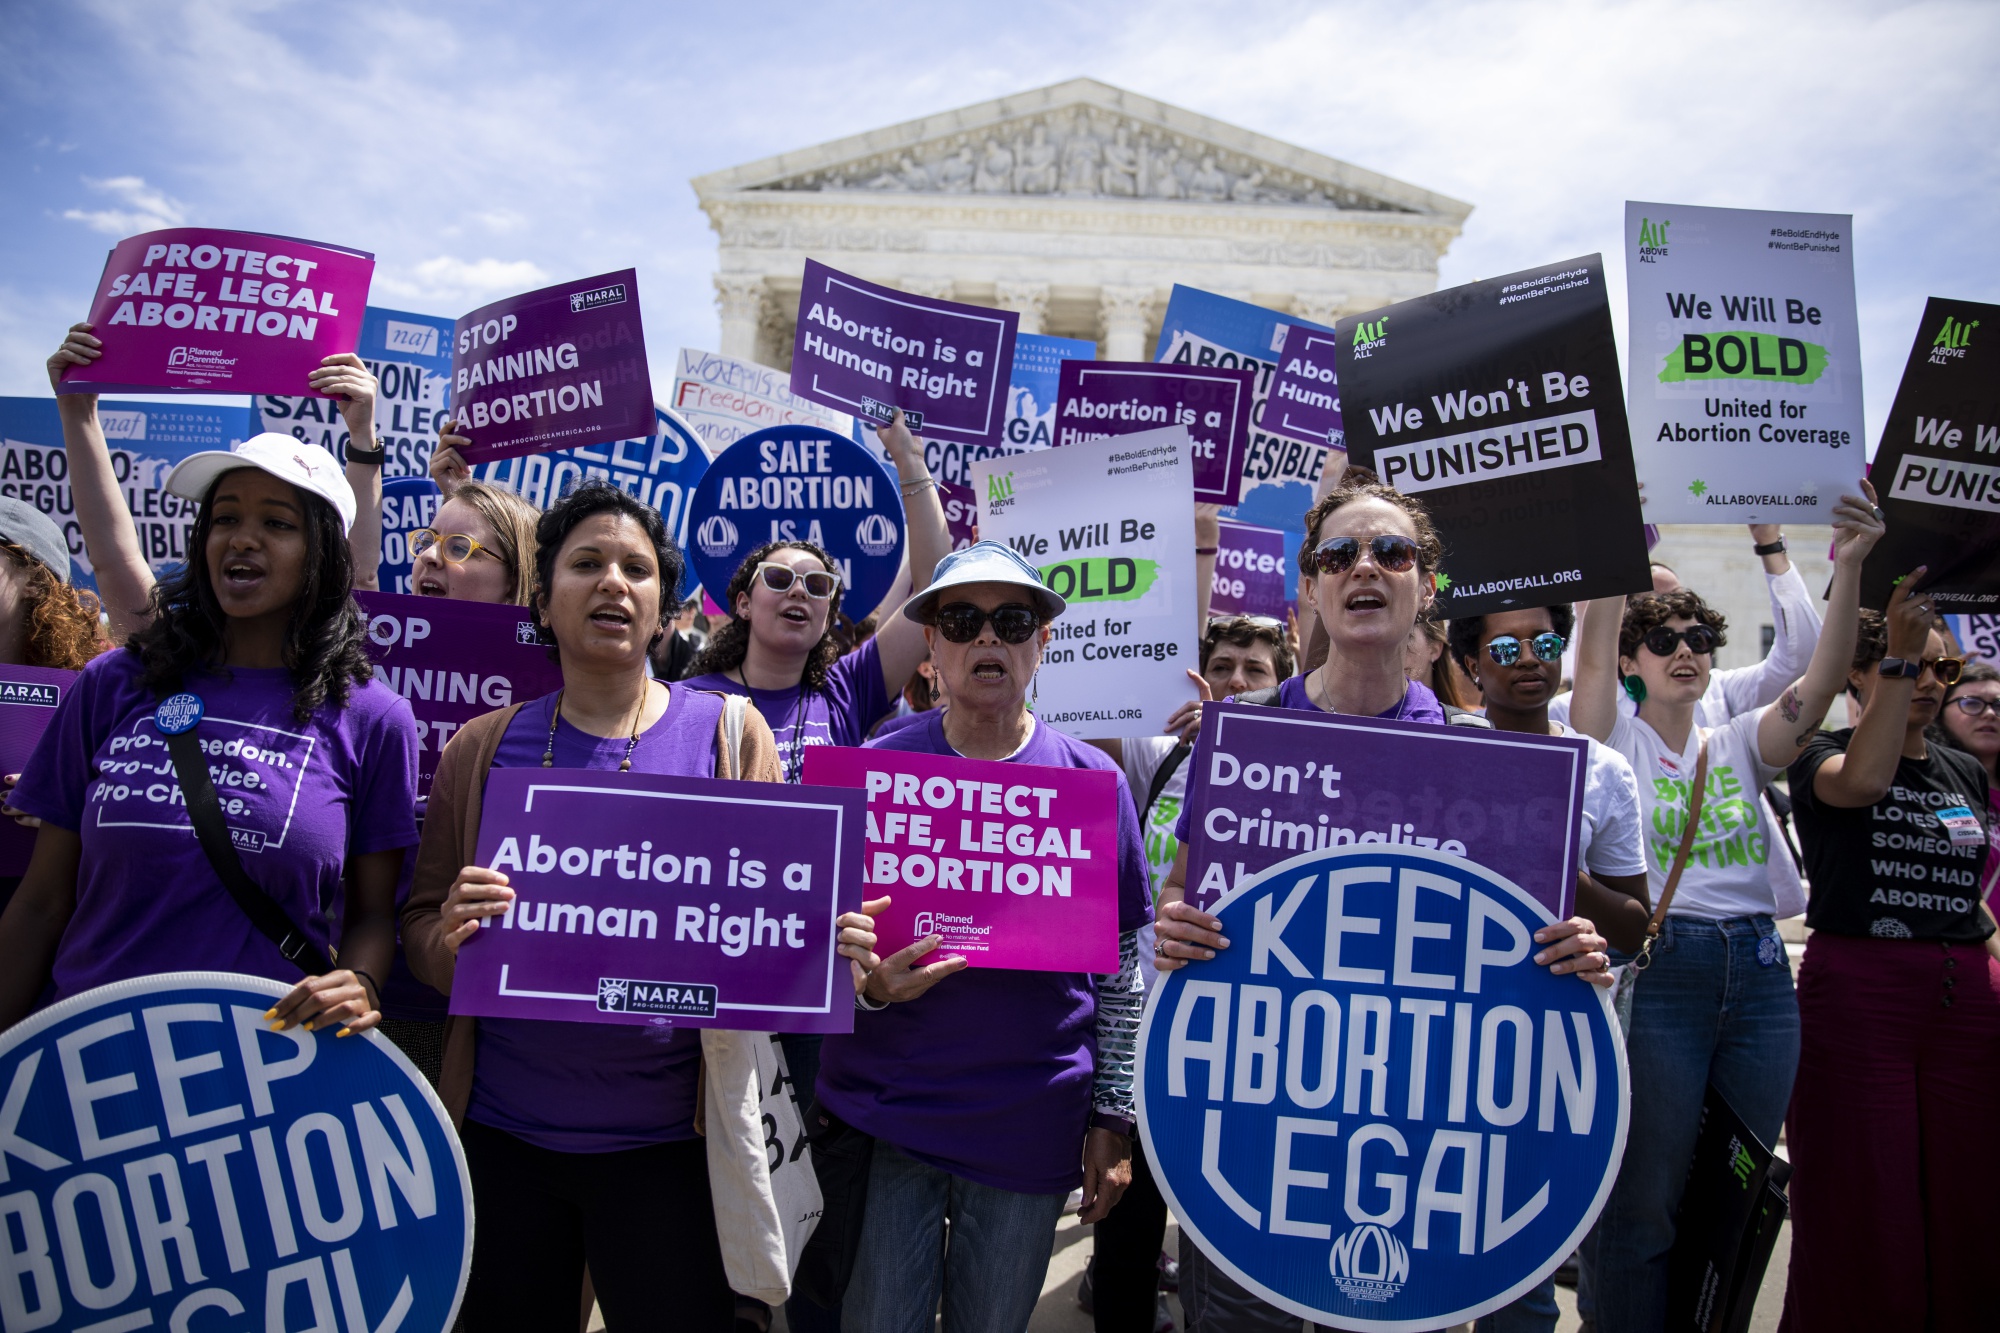 Pro-choice activists holds signs during a rally in front of the U.S. Supreme Court.